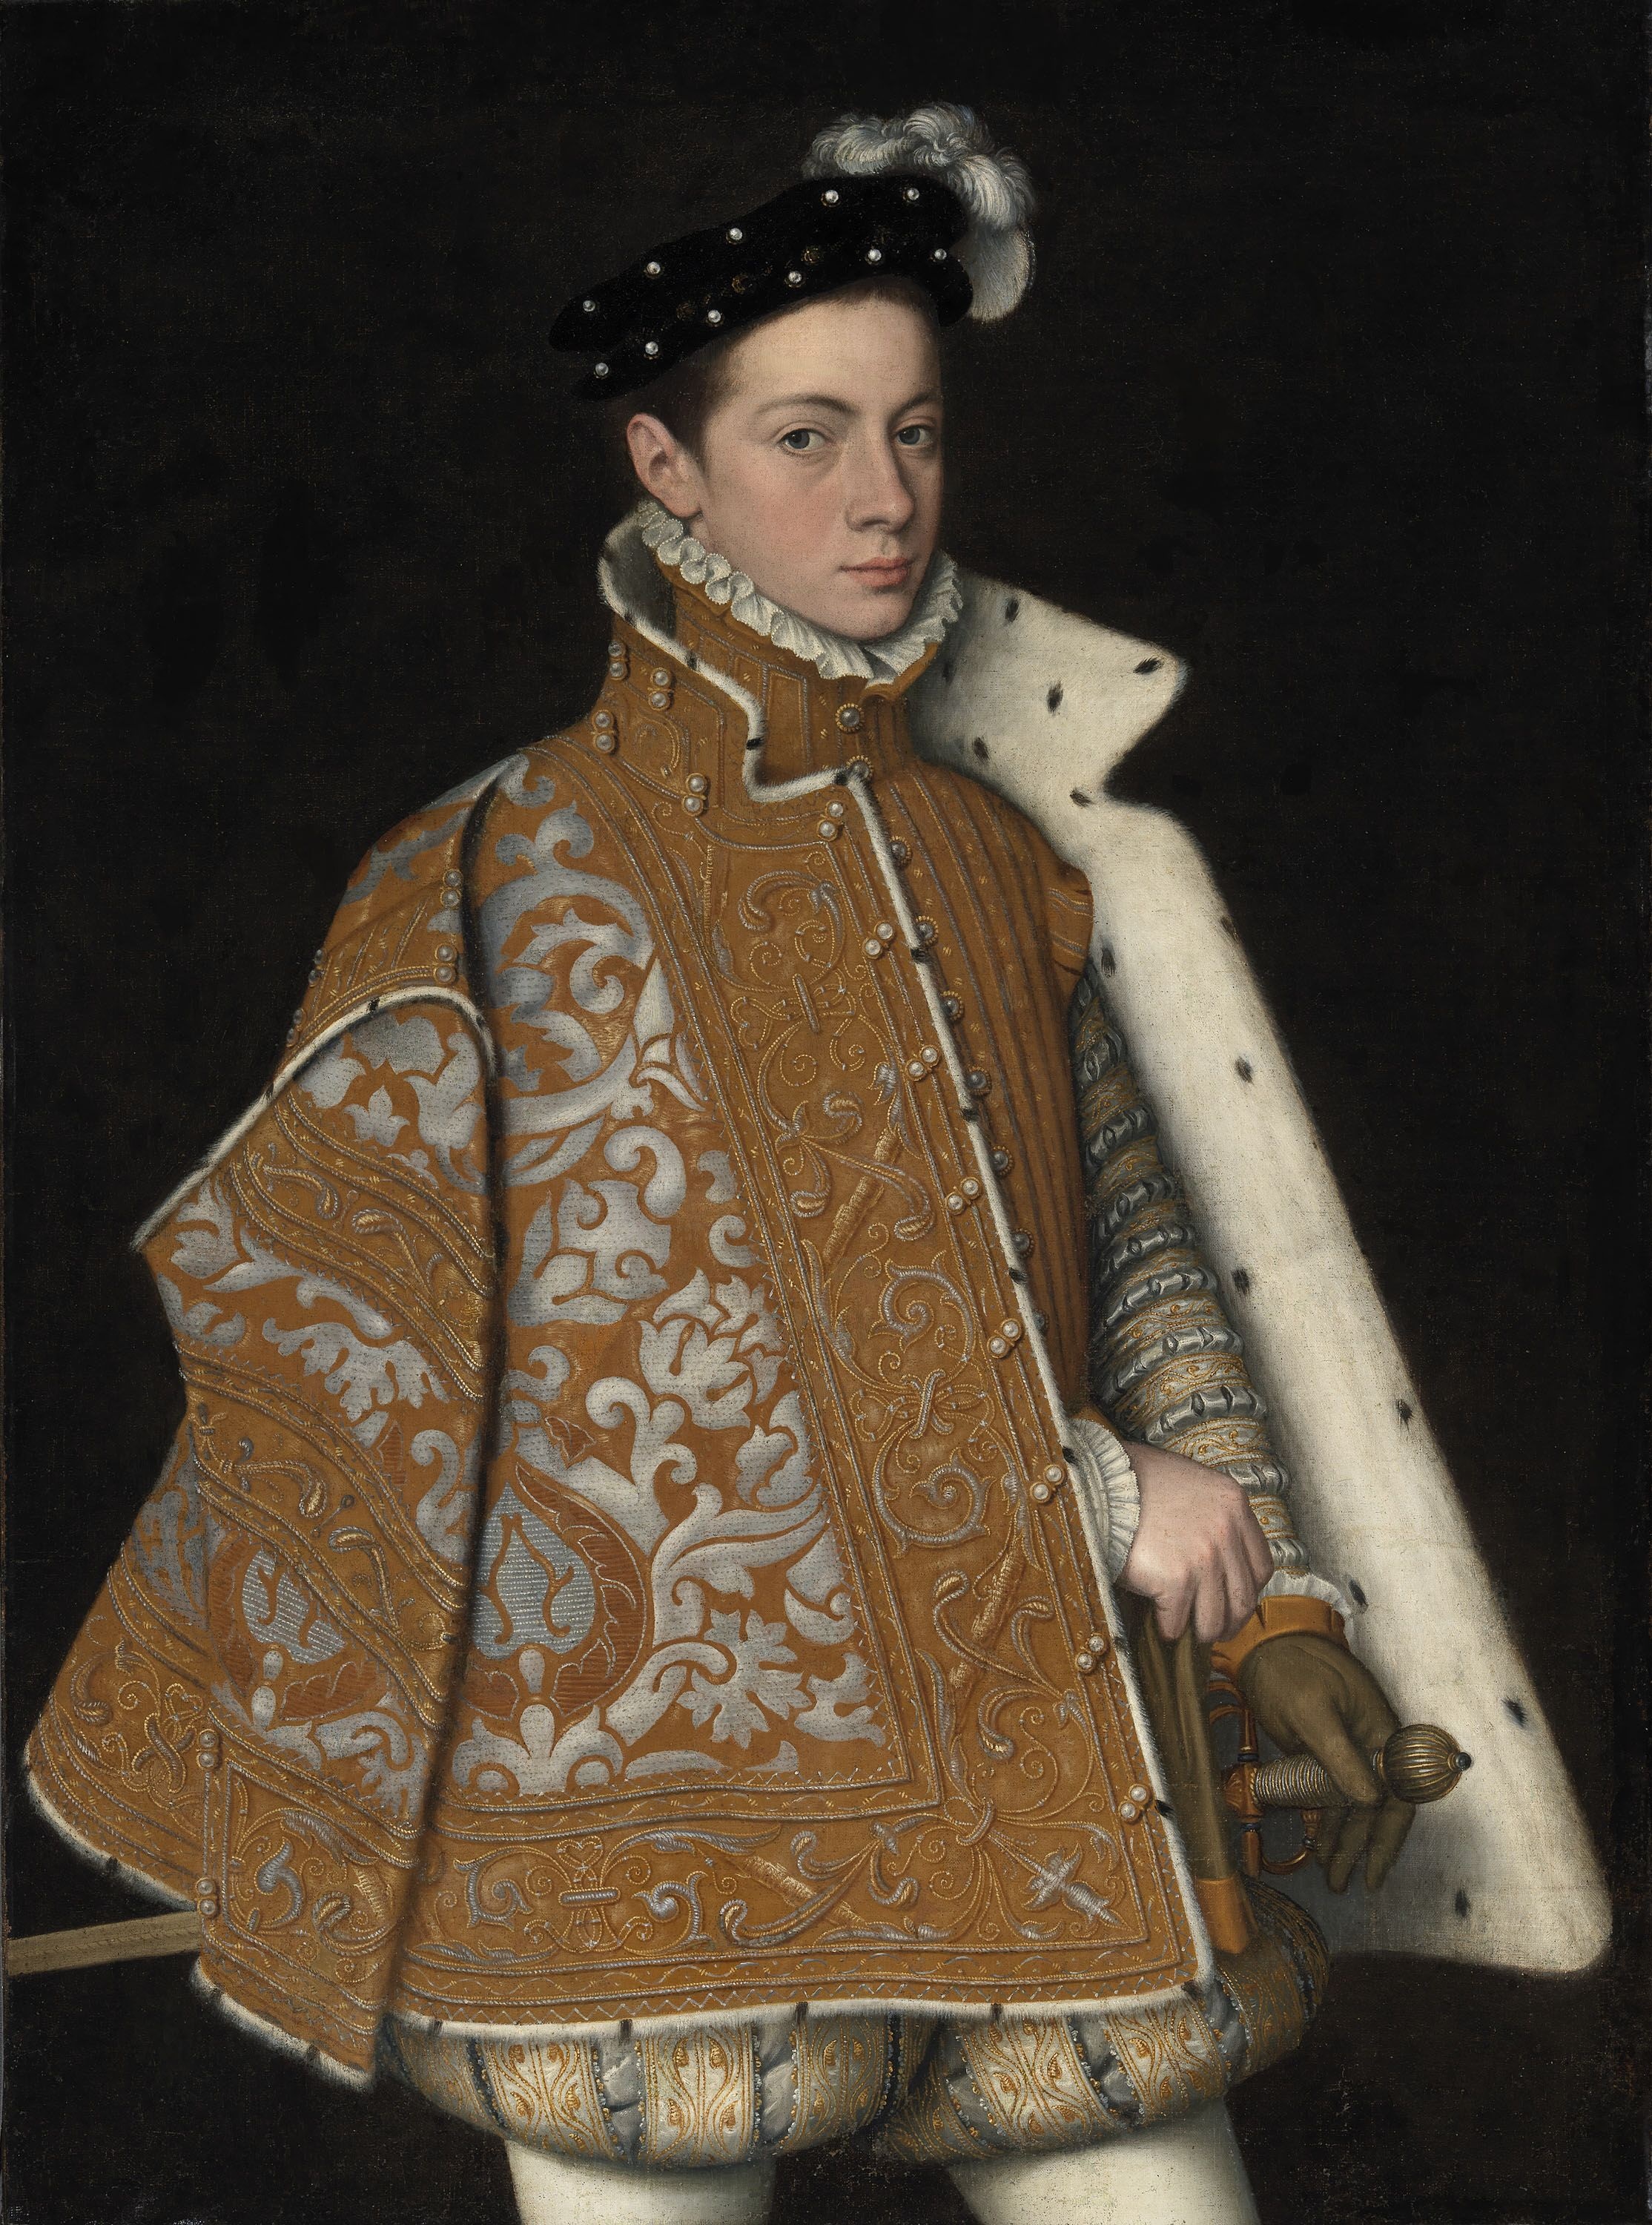 A portrait of a young man against a dark background, cropped at the thighs. He is extravagantly dressed in a brocade cap lined with ermine fir and a black, embellished hat. His left hand is gloved and rests on the sword he has at his hip. He looks at the viewer directly, with confidence.